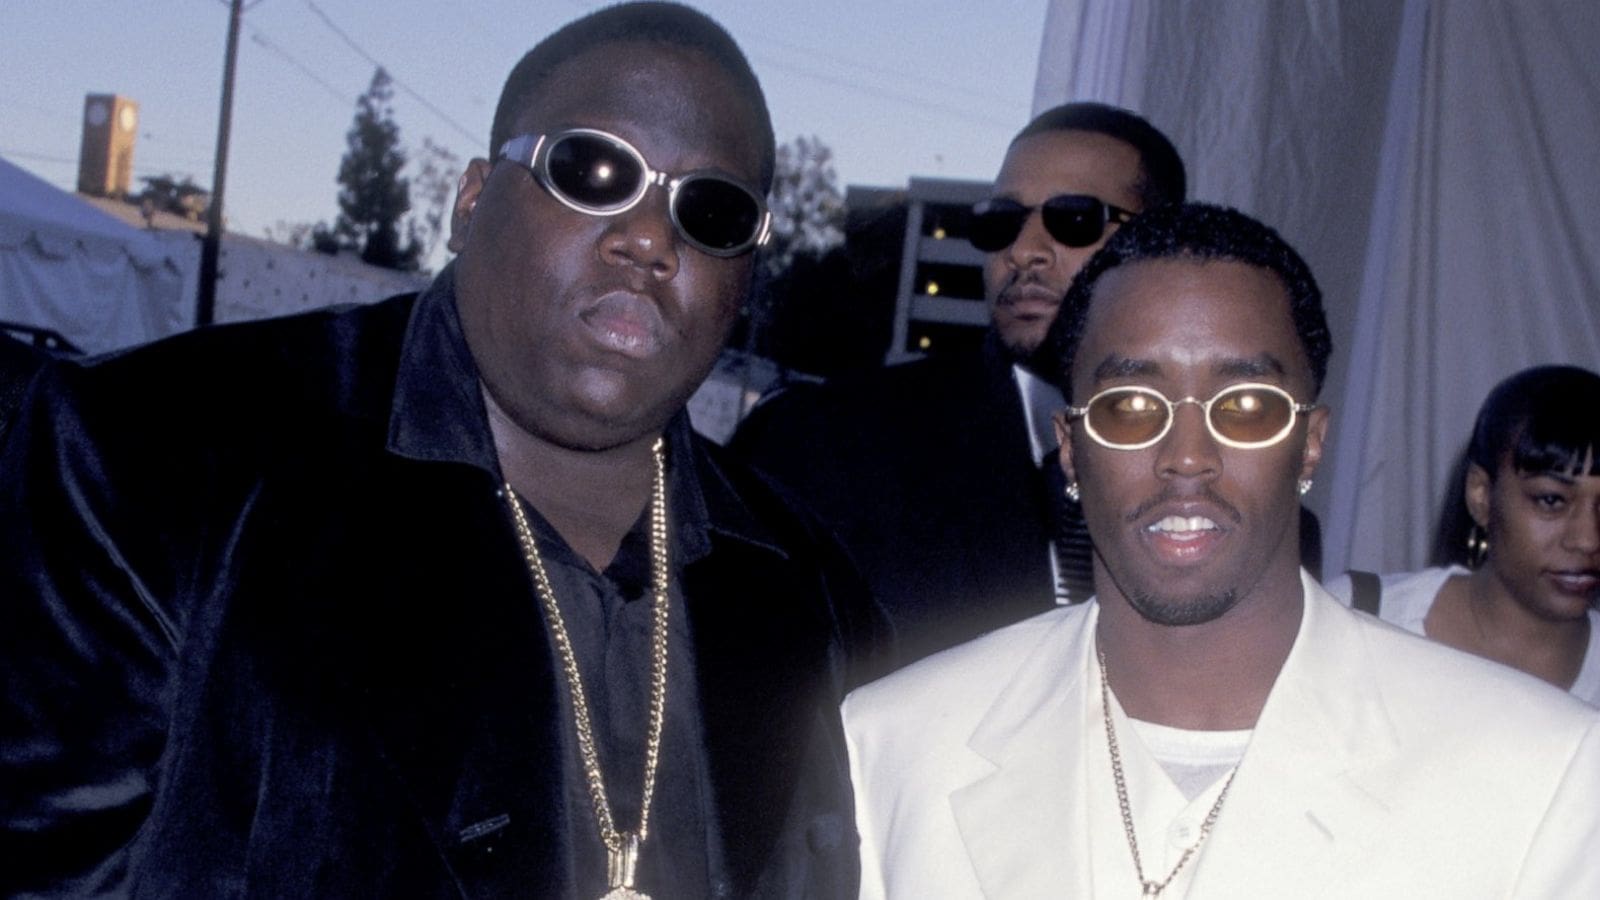 Diddy Is Crazy With Excitement After The Notorious BIG Made It To The 2020 Rock & Roll Hall Of Fame - See His Video